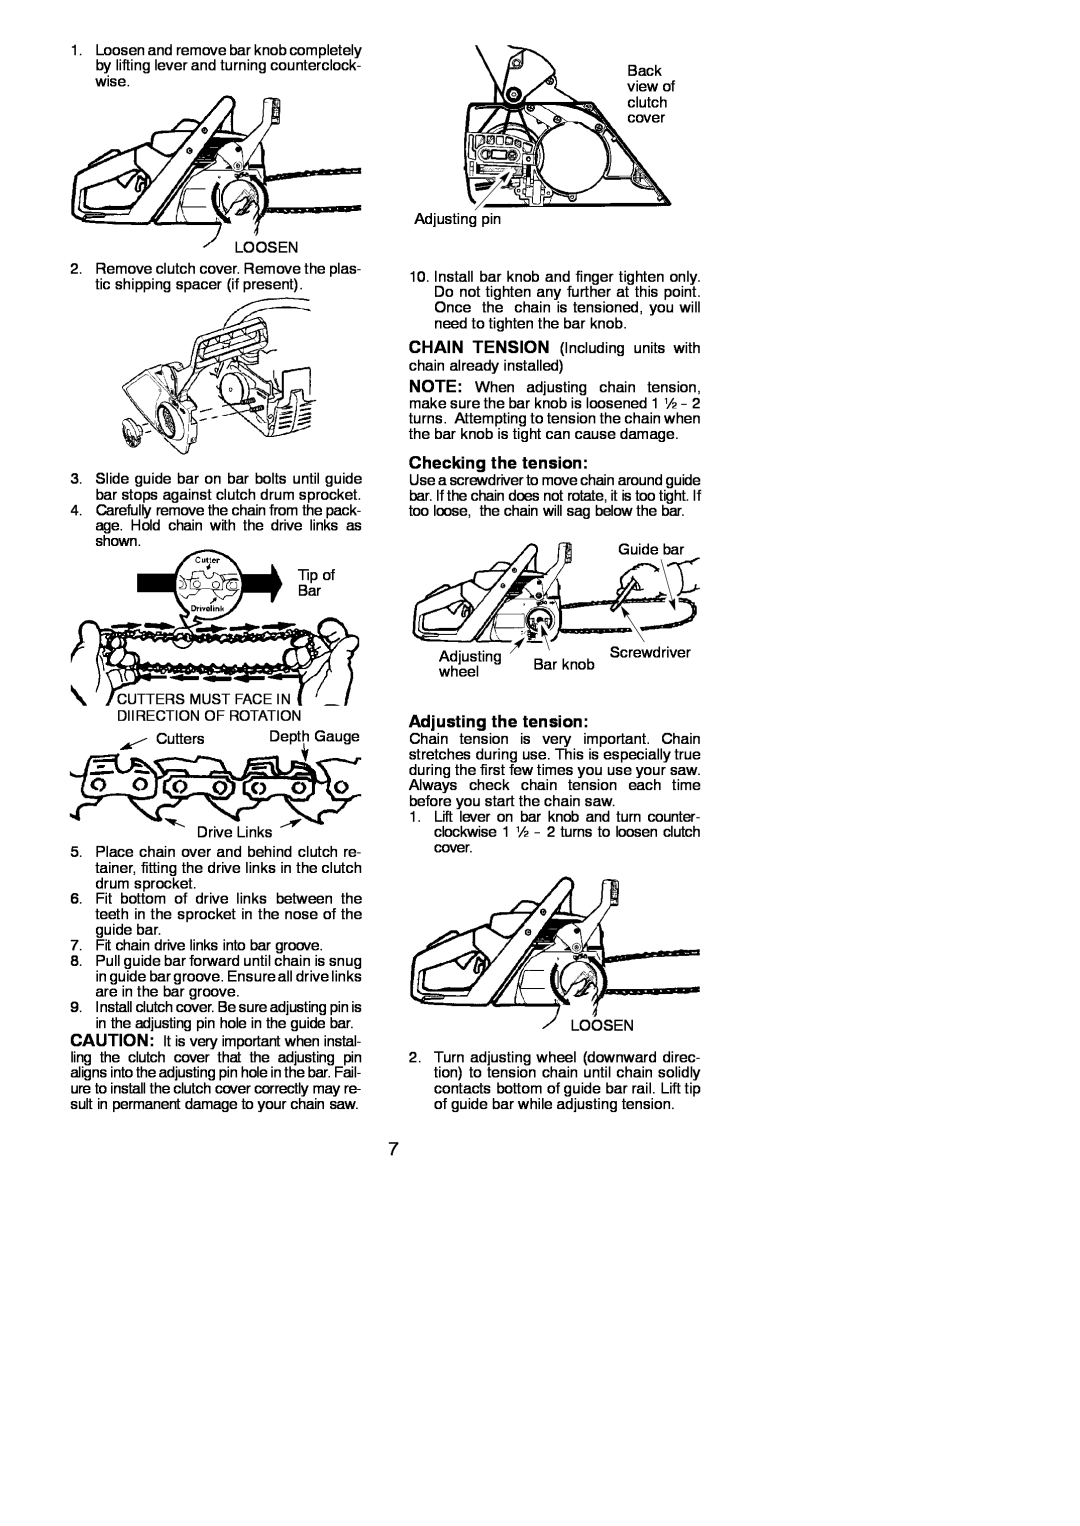 Poulan 545186803 instruction manual Checking the tension, Adjusting the tension 